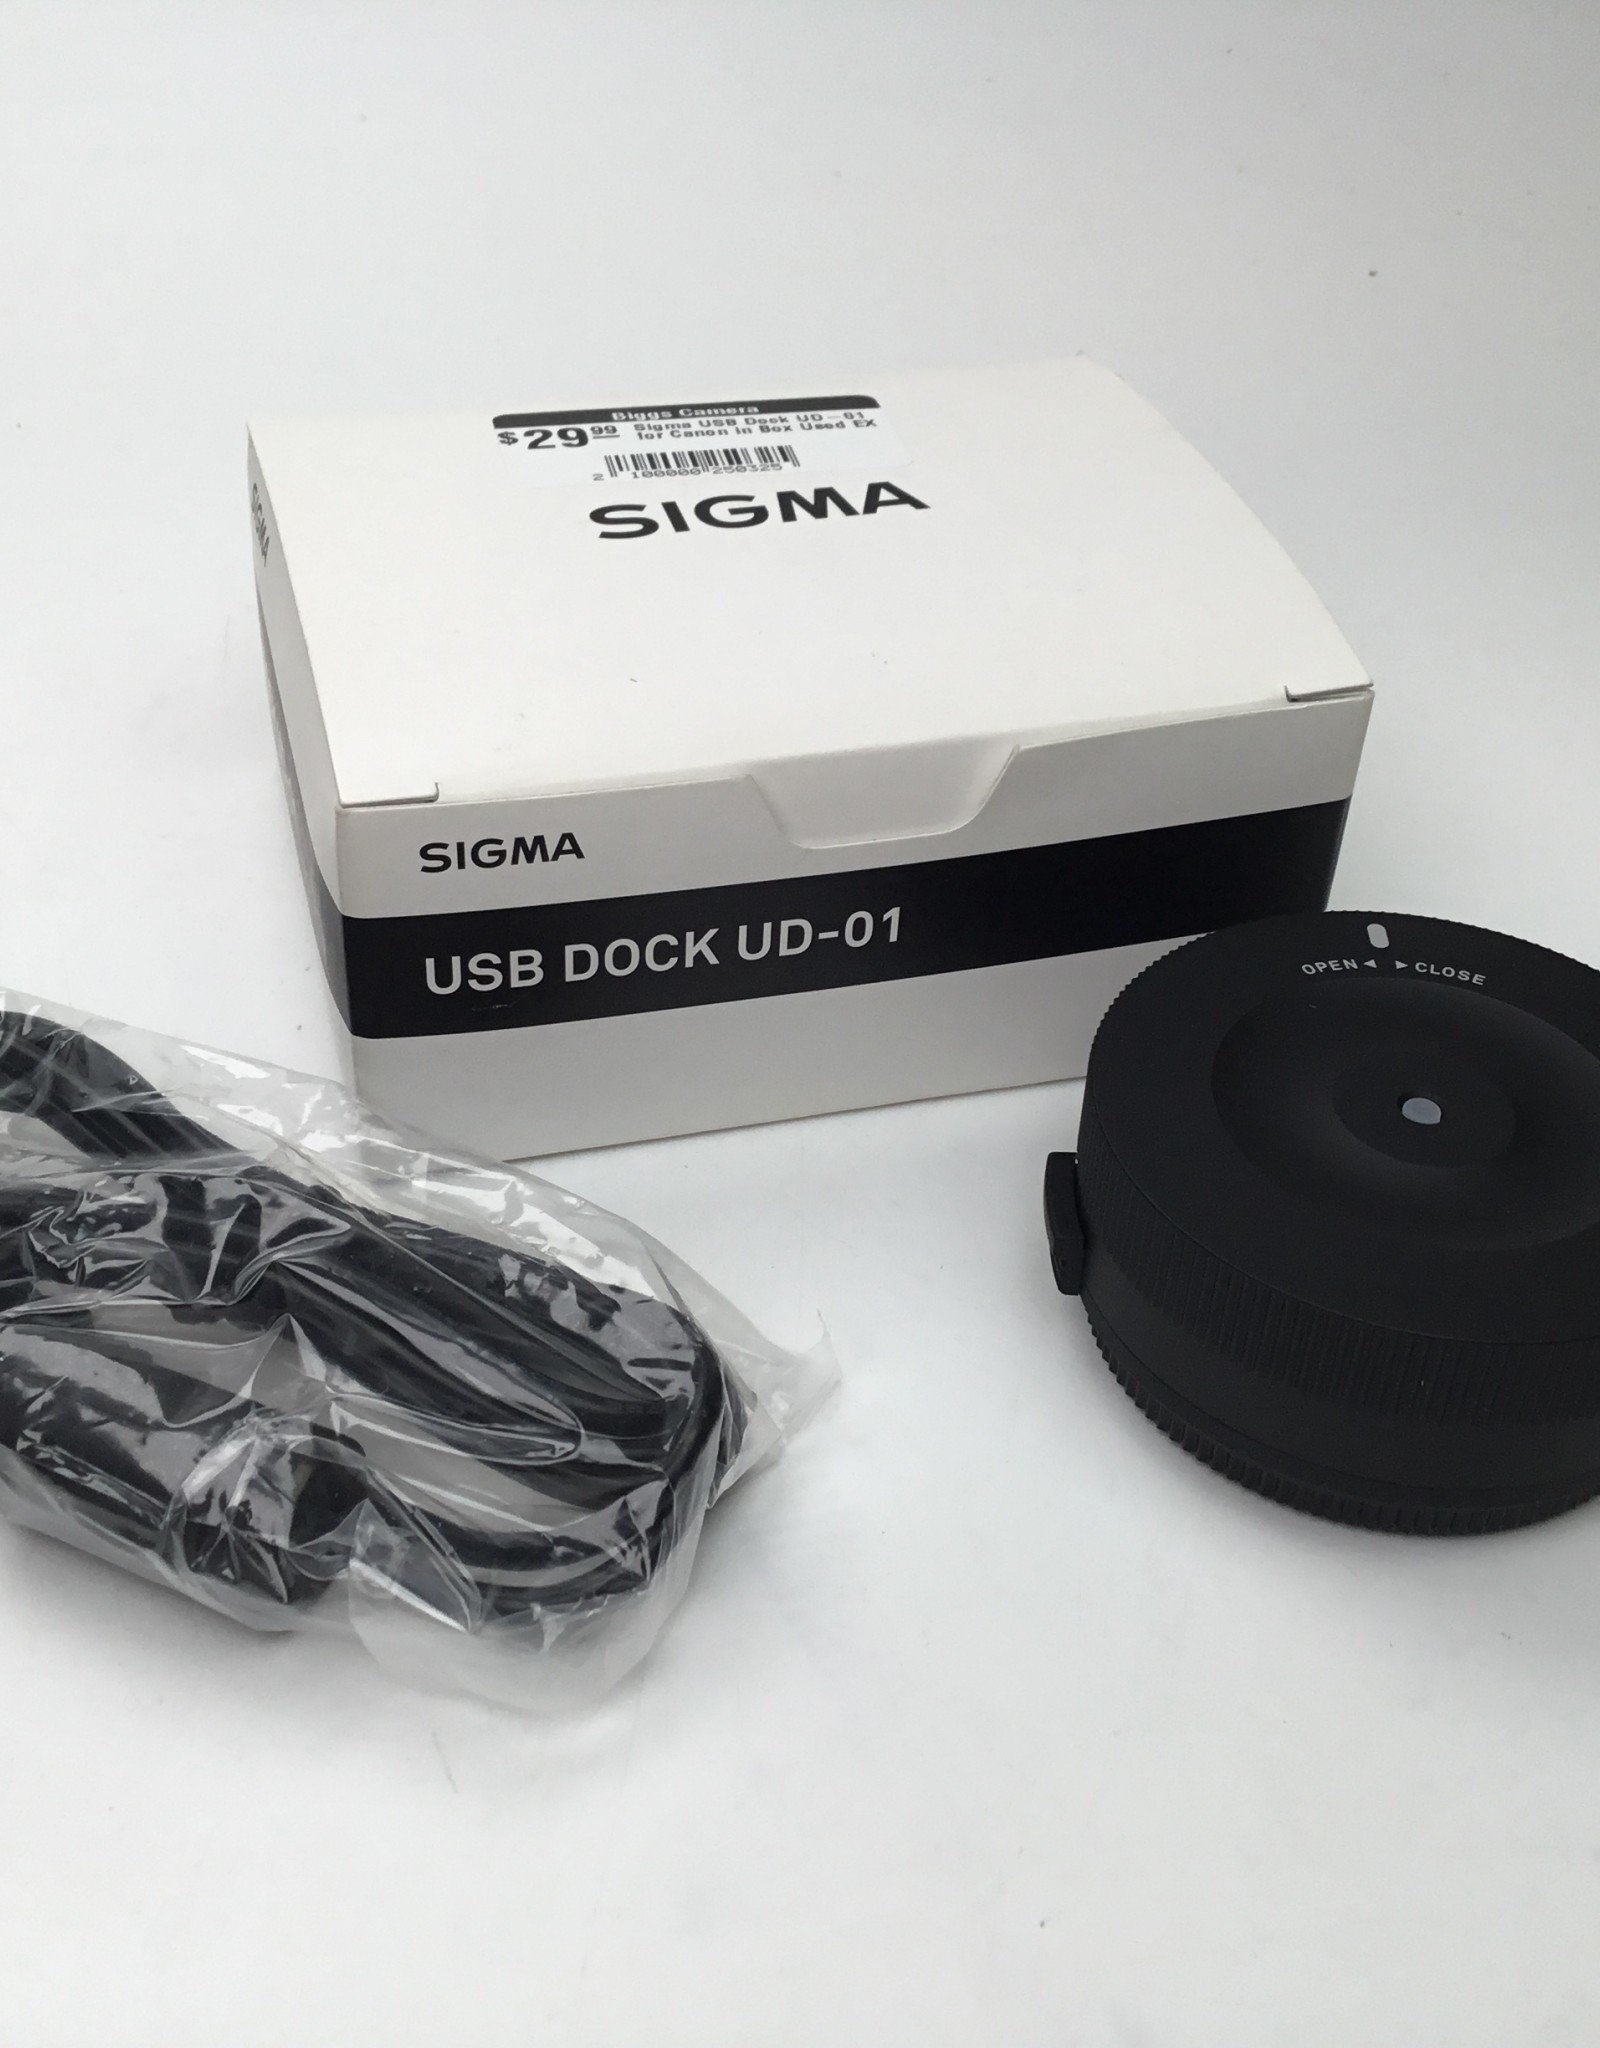 SIGMA Sigma USB Dock UD-01 for Canon in Box Used EX